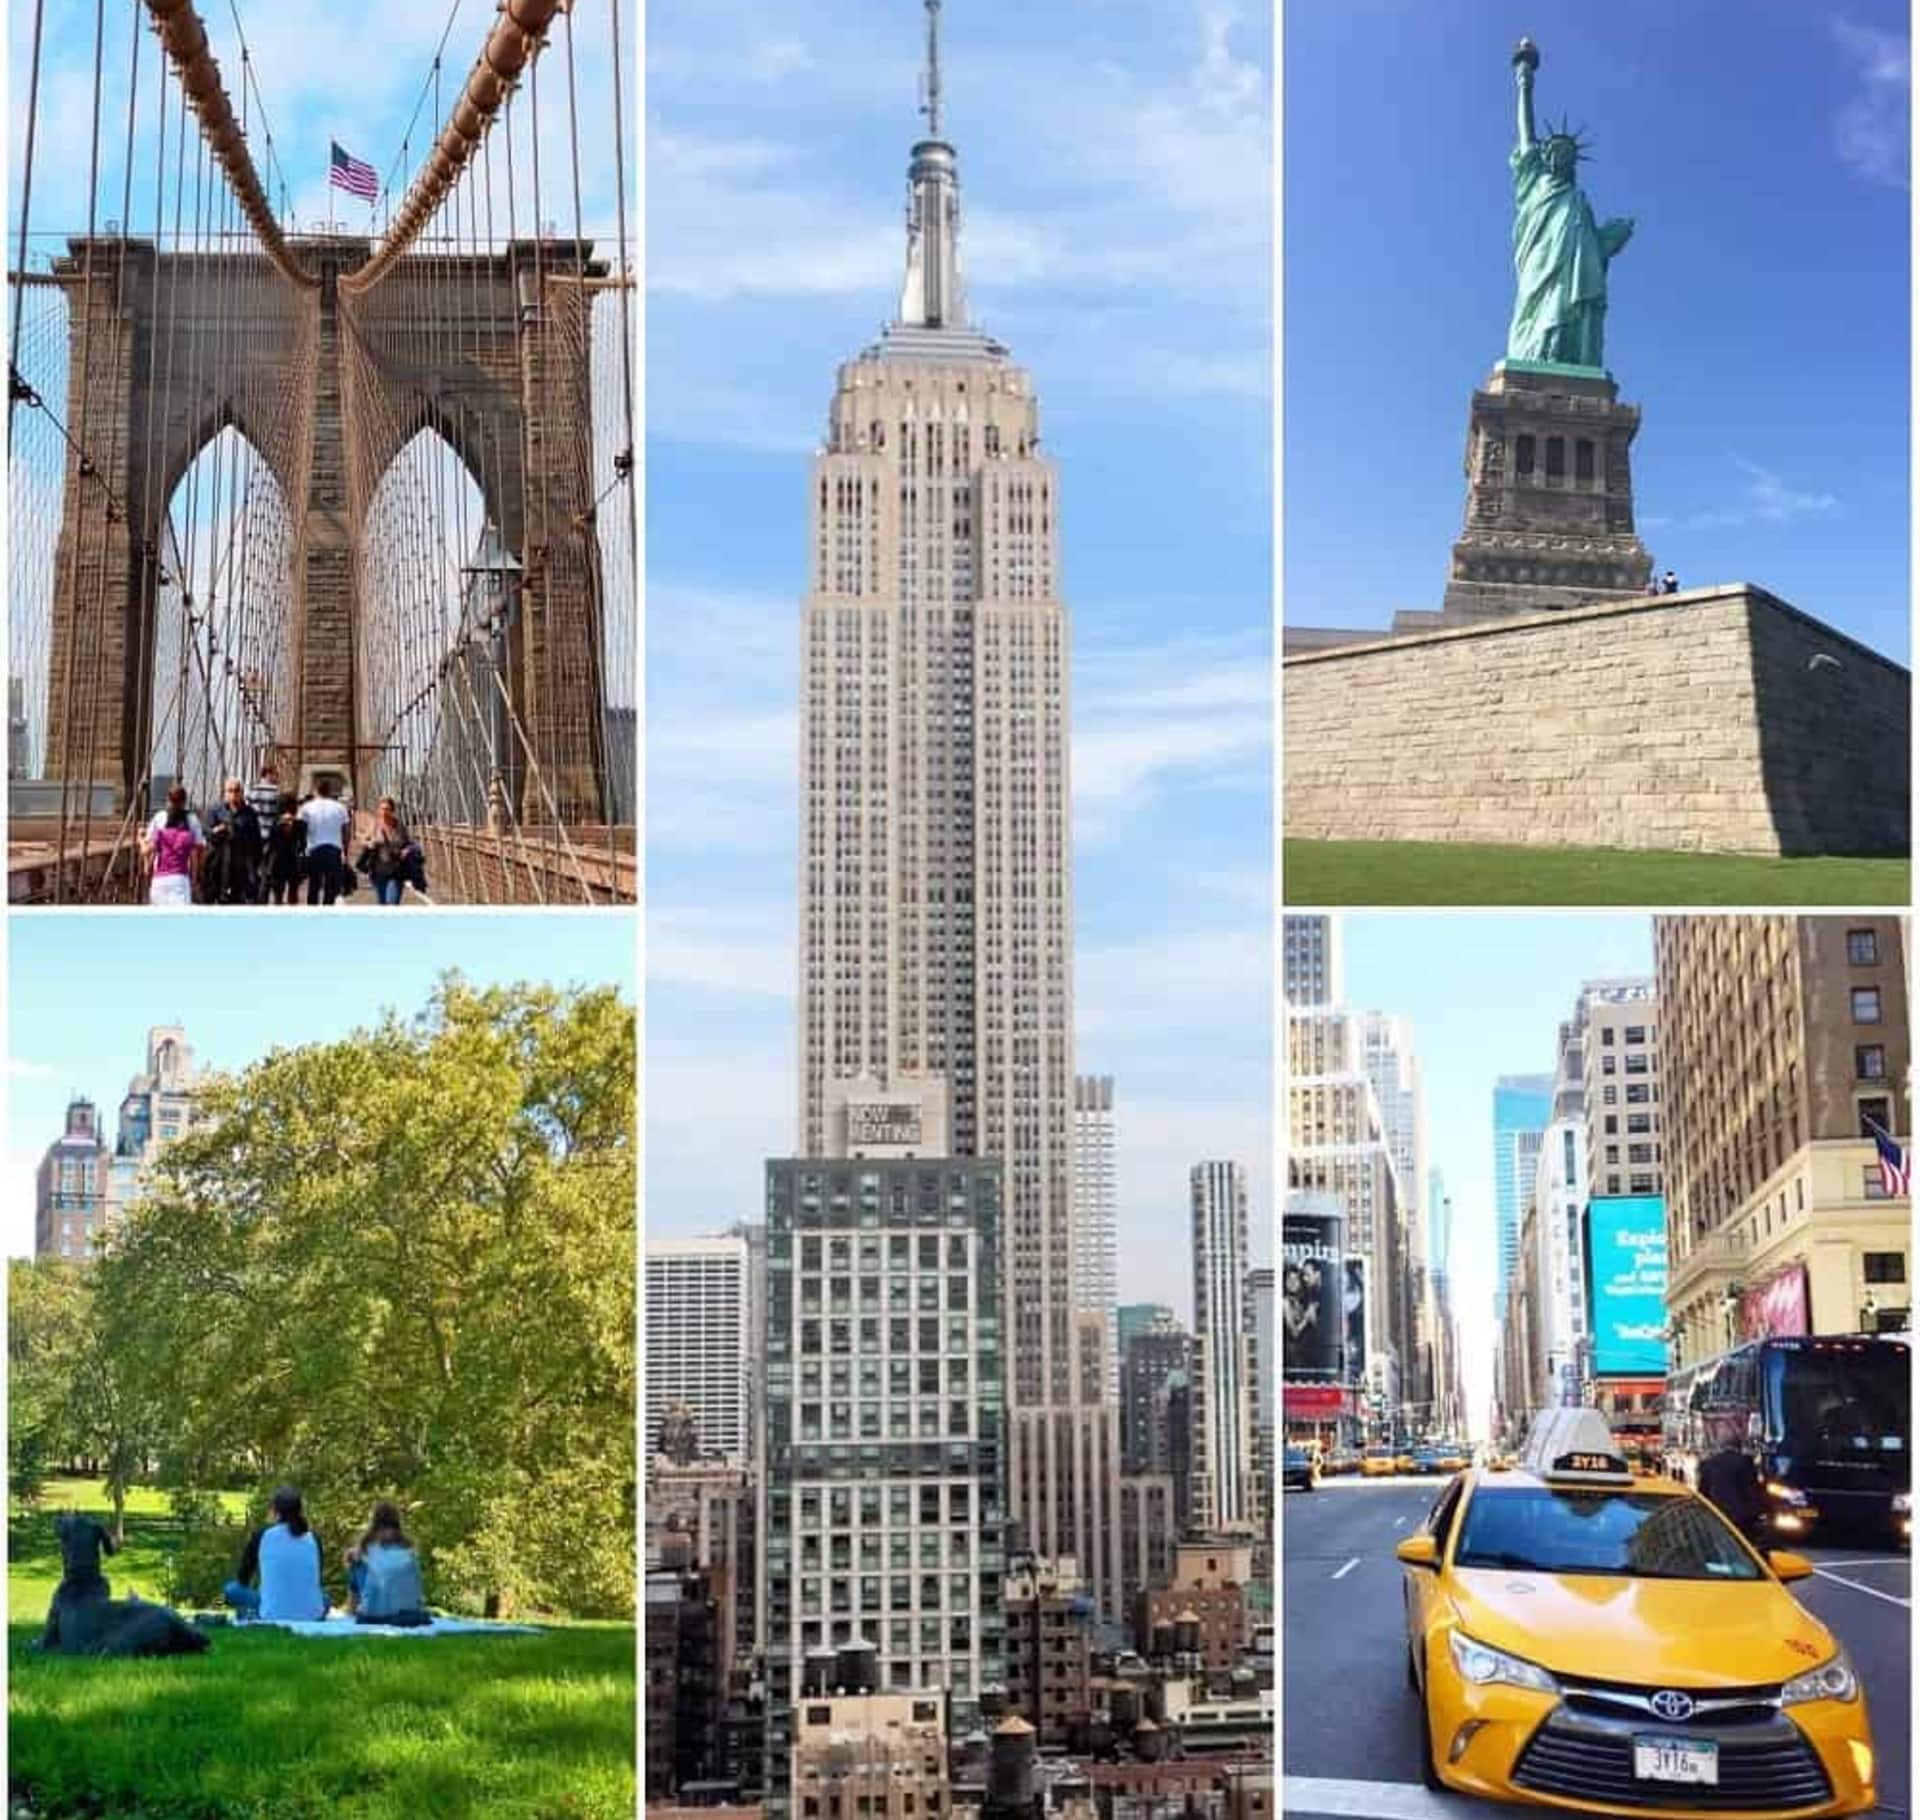 voyage guide a new york